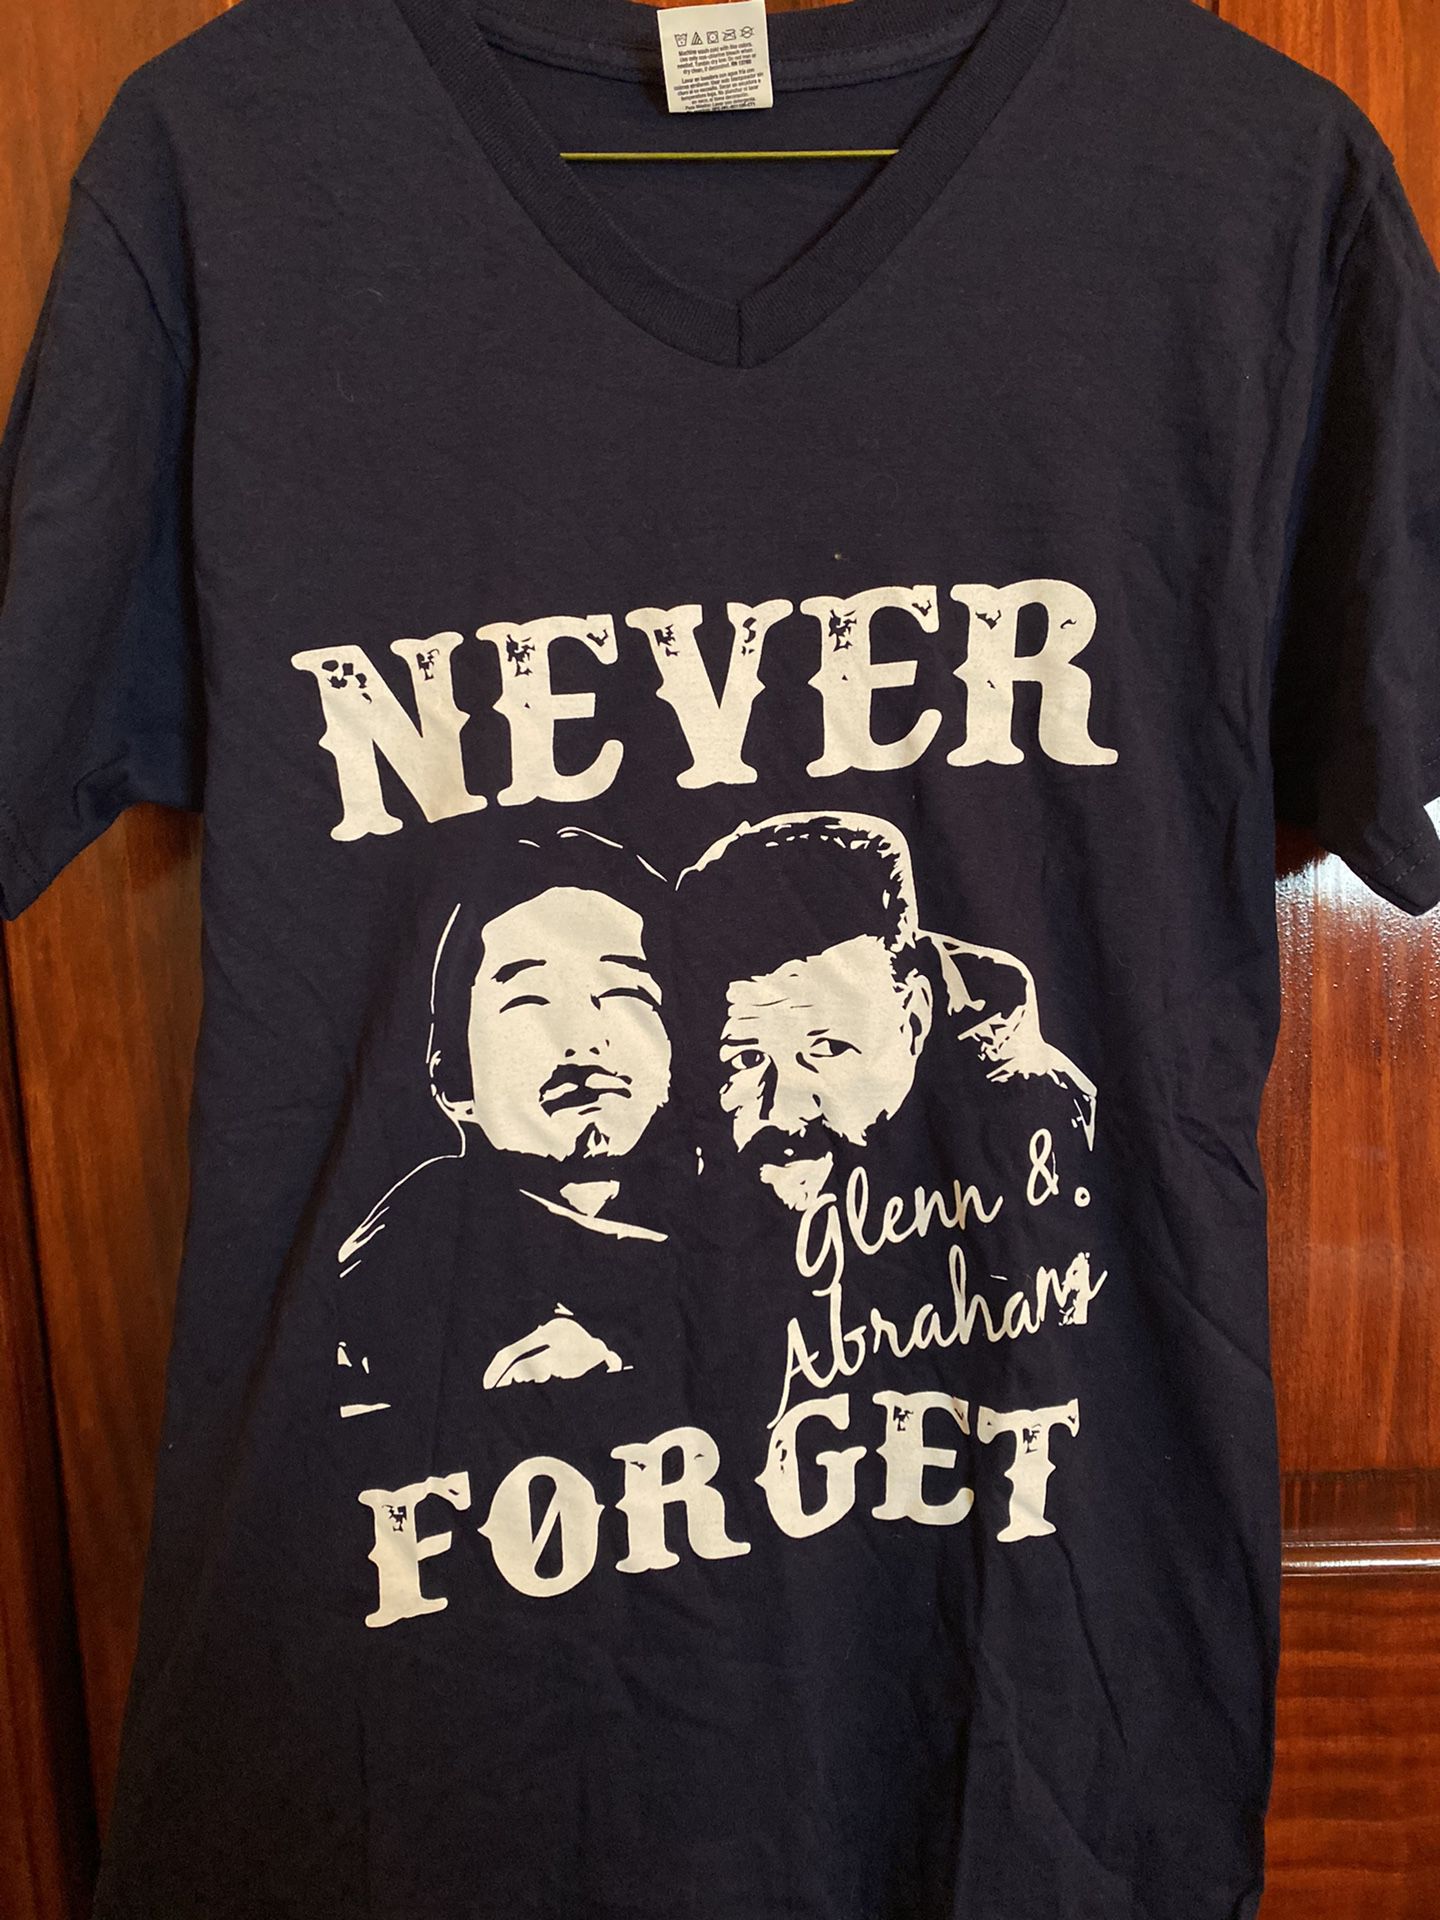 The Walking Dead “Never Forget” Size Small